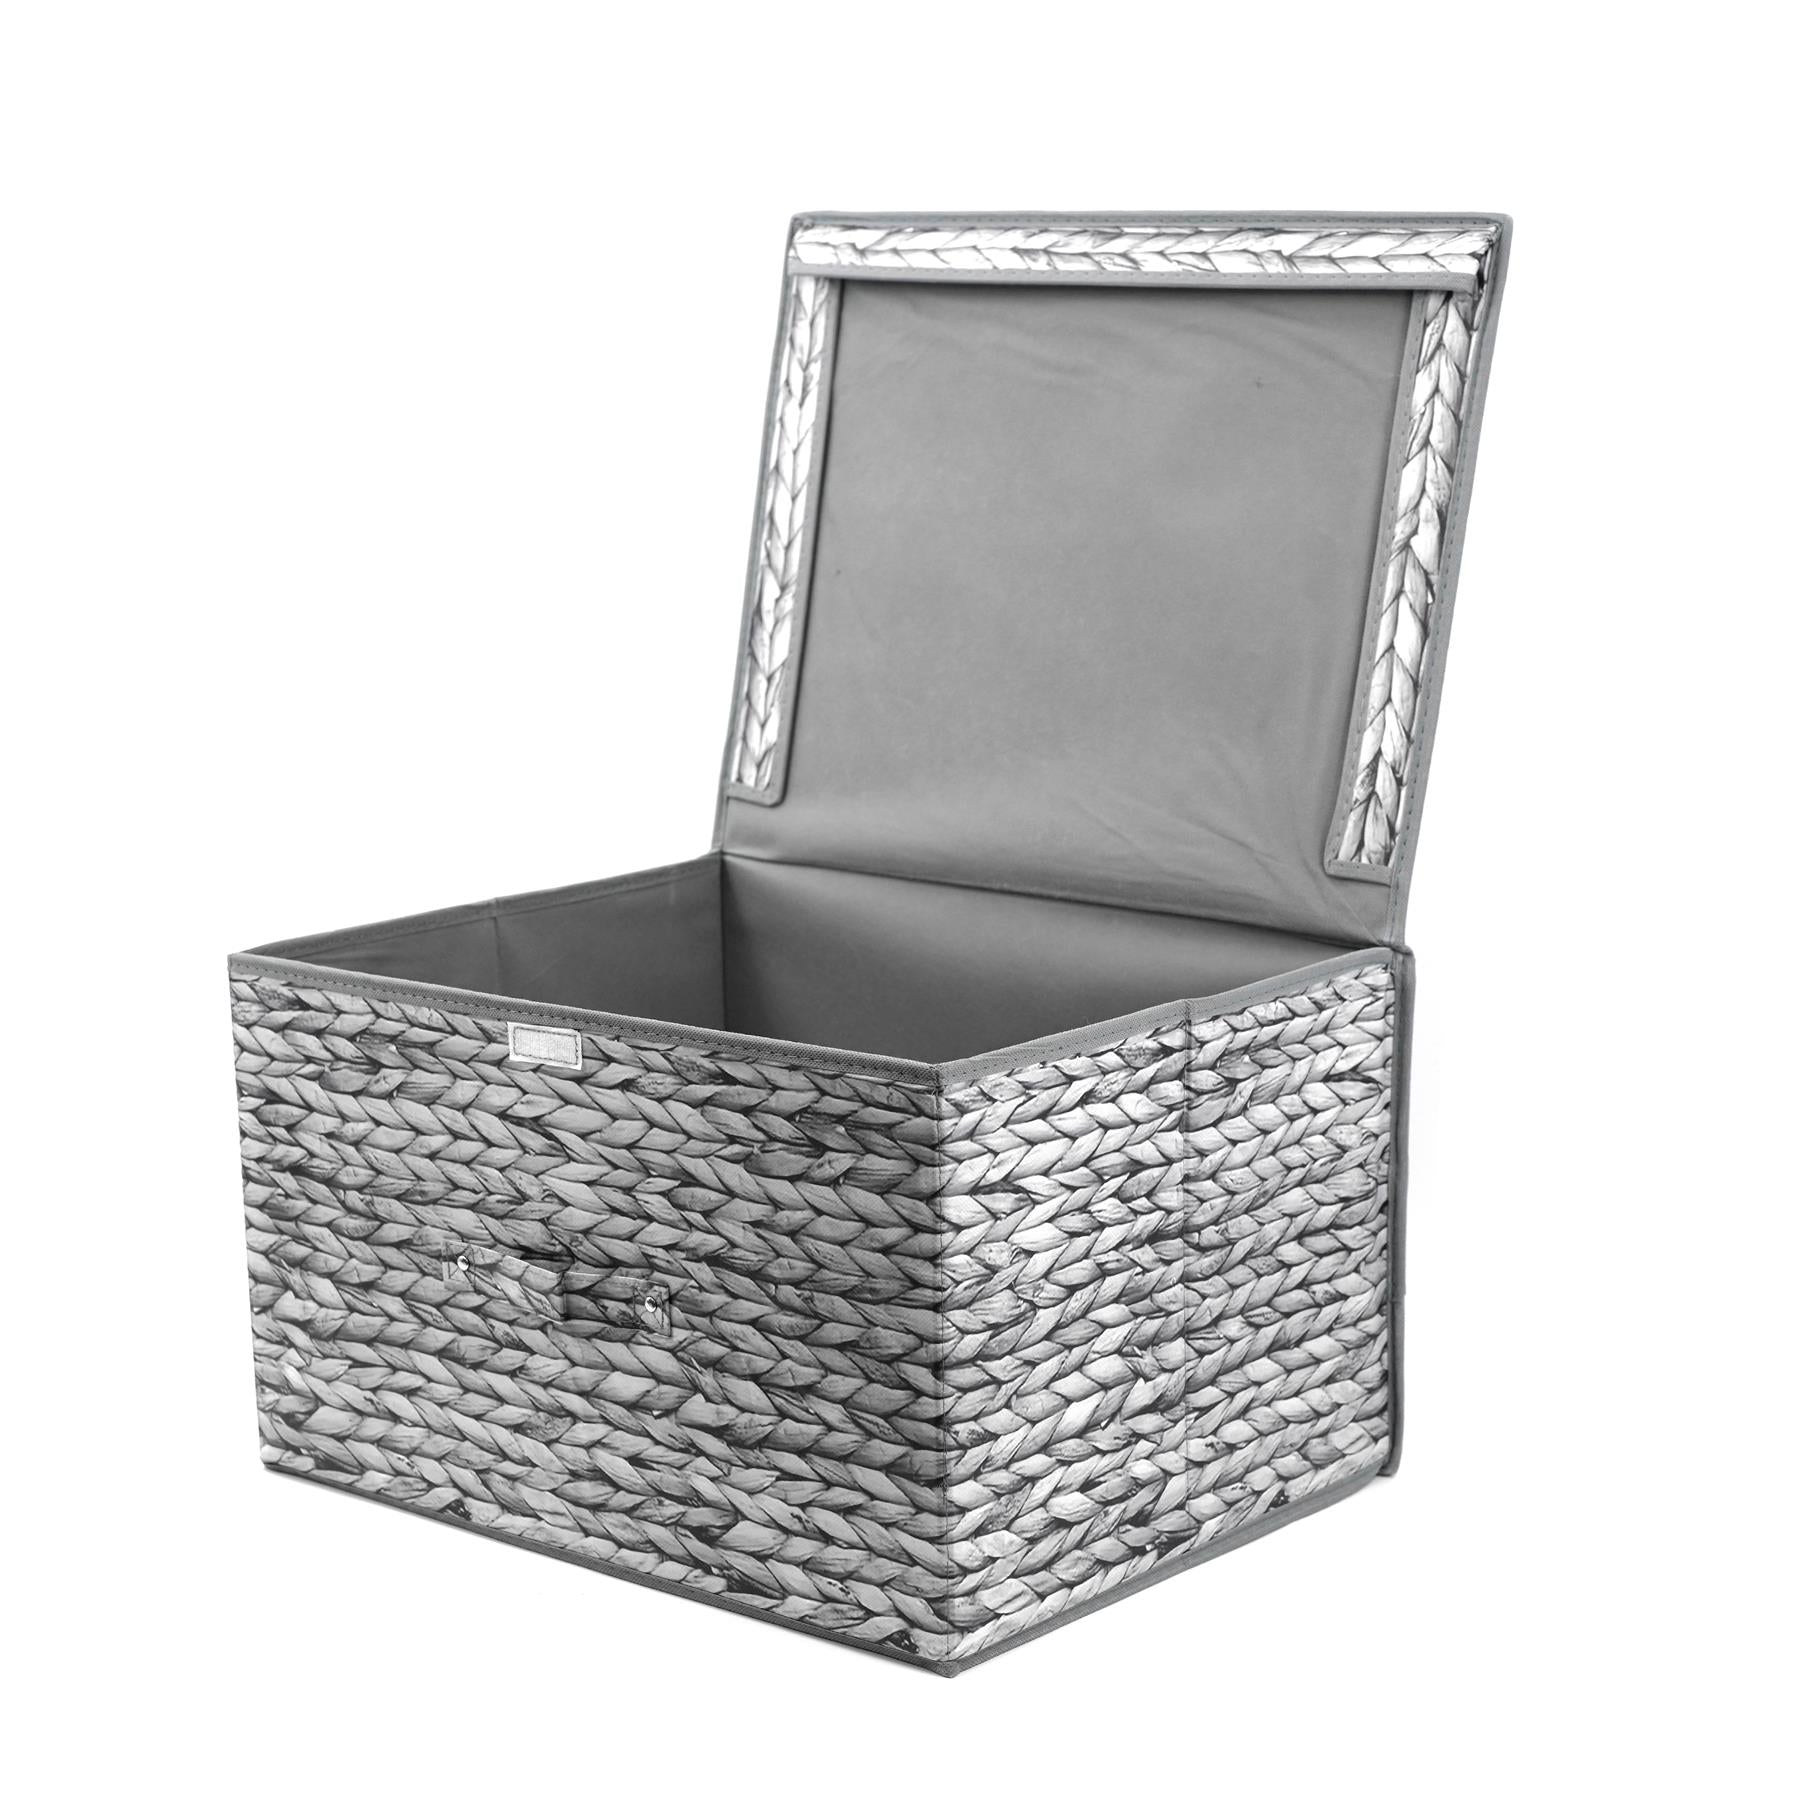 Weave Grey Storage Box by The Magic Toy Shop - The Magic Toy Shop